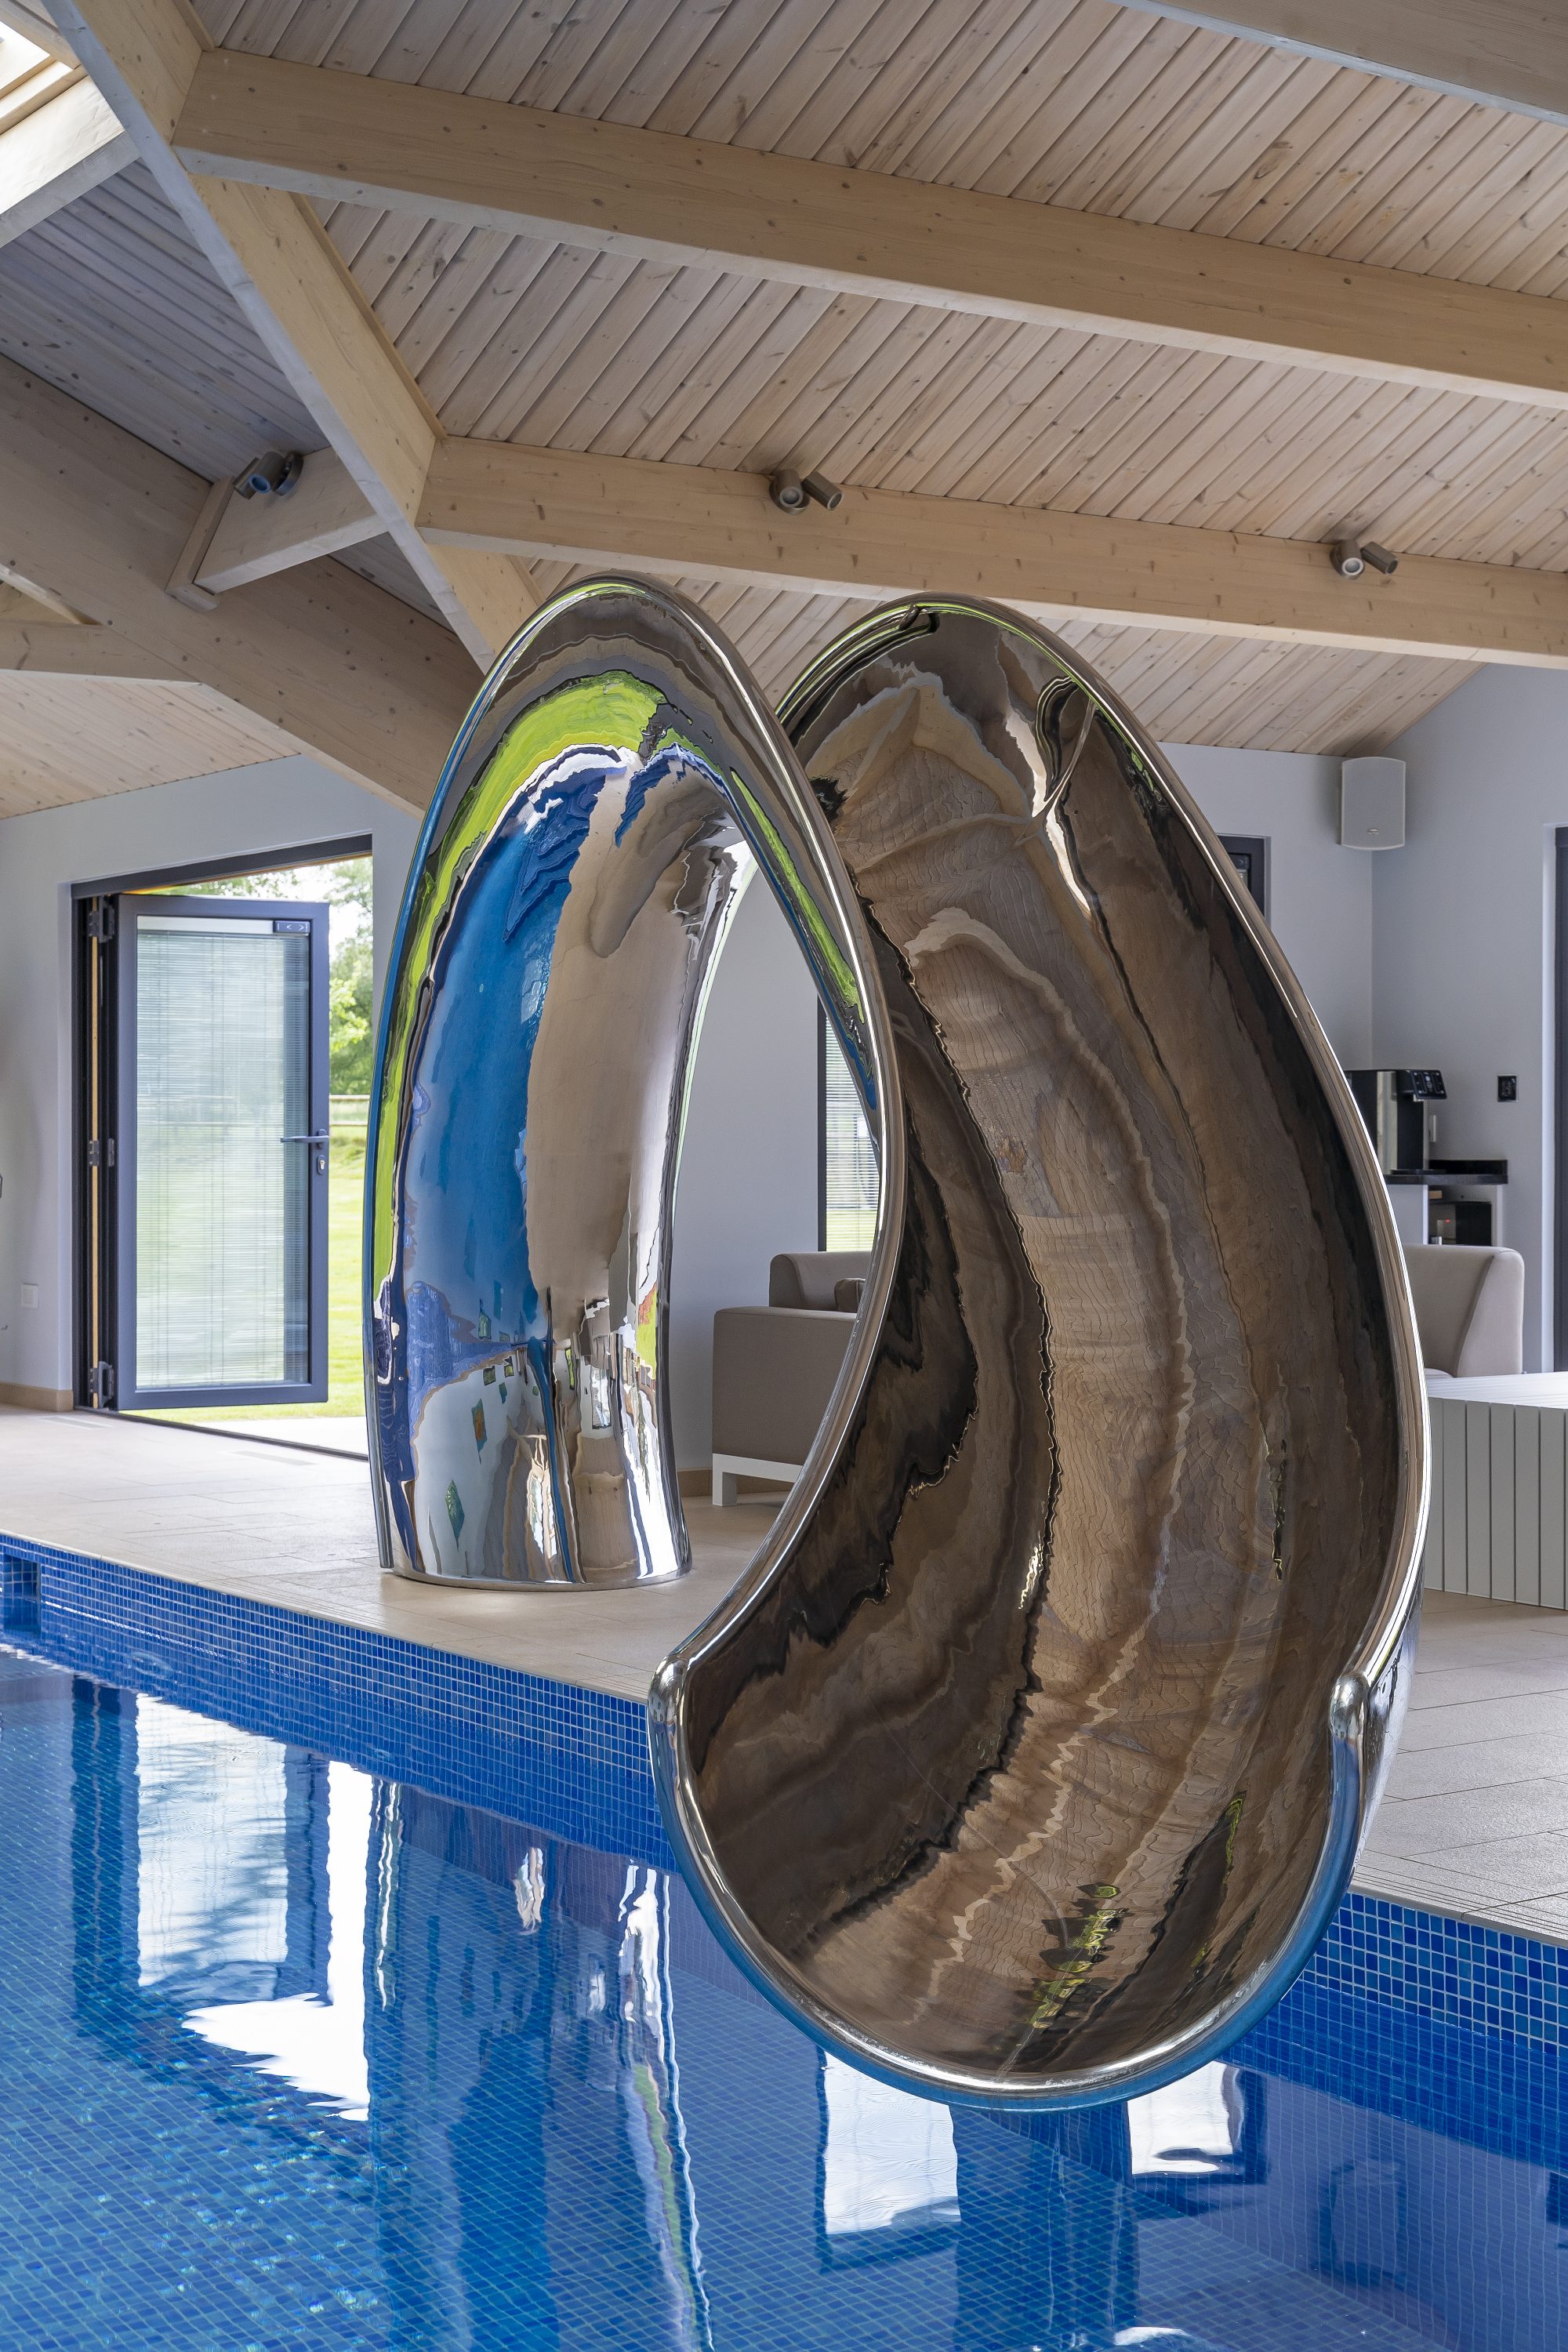 Front view of the pool slide shoot, curving over the pool in indoor pool house